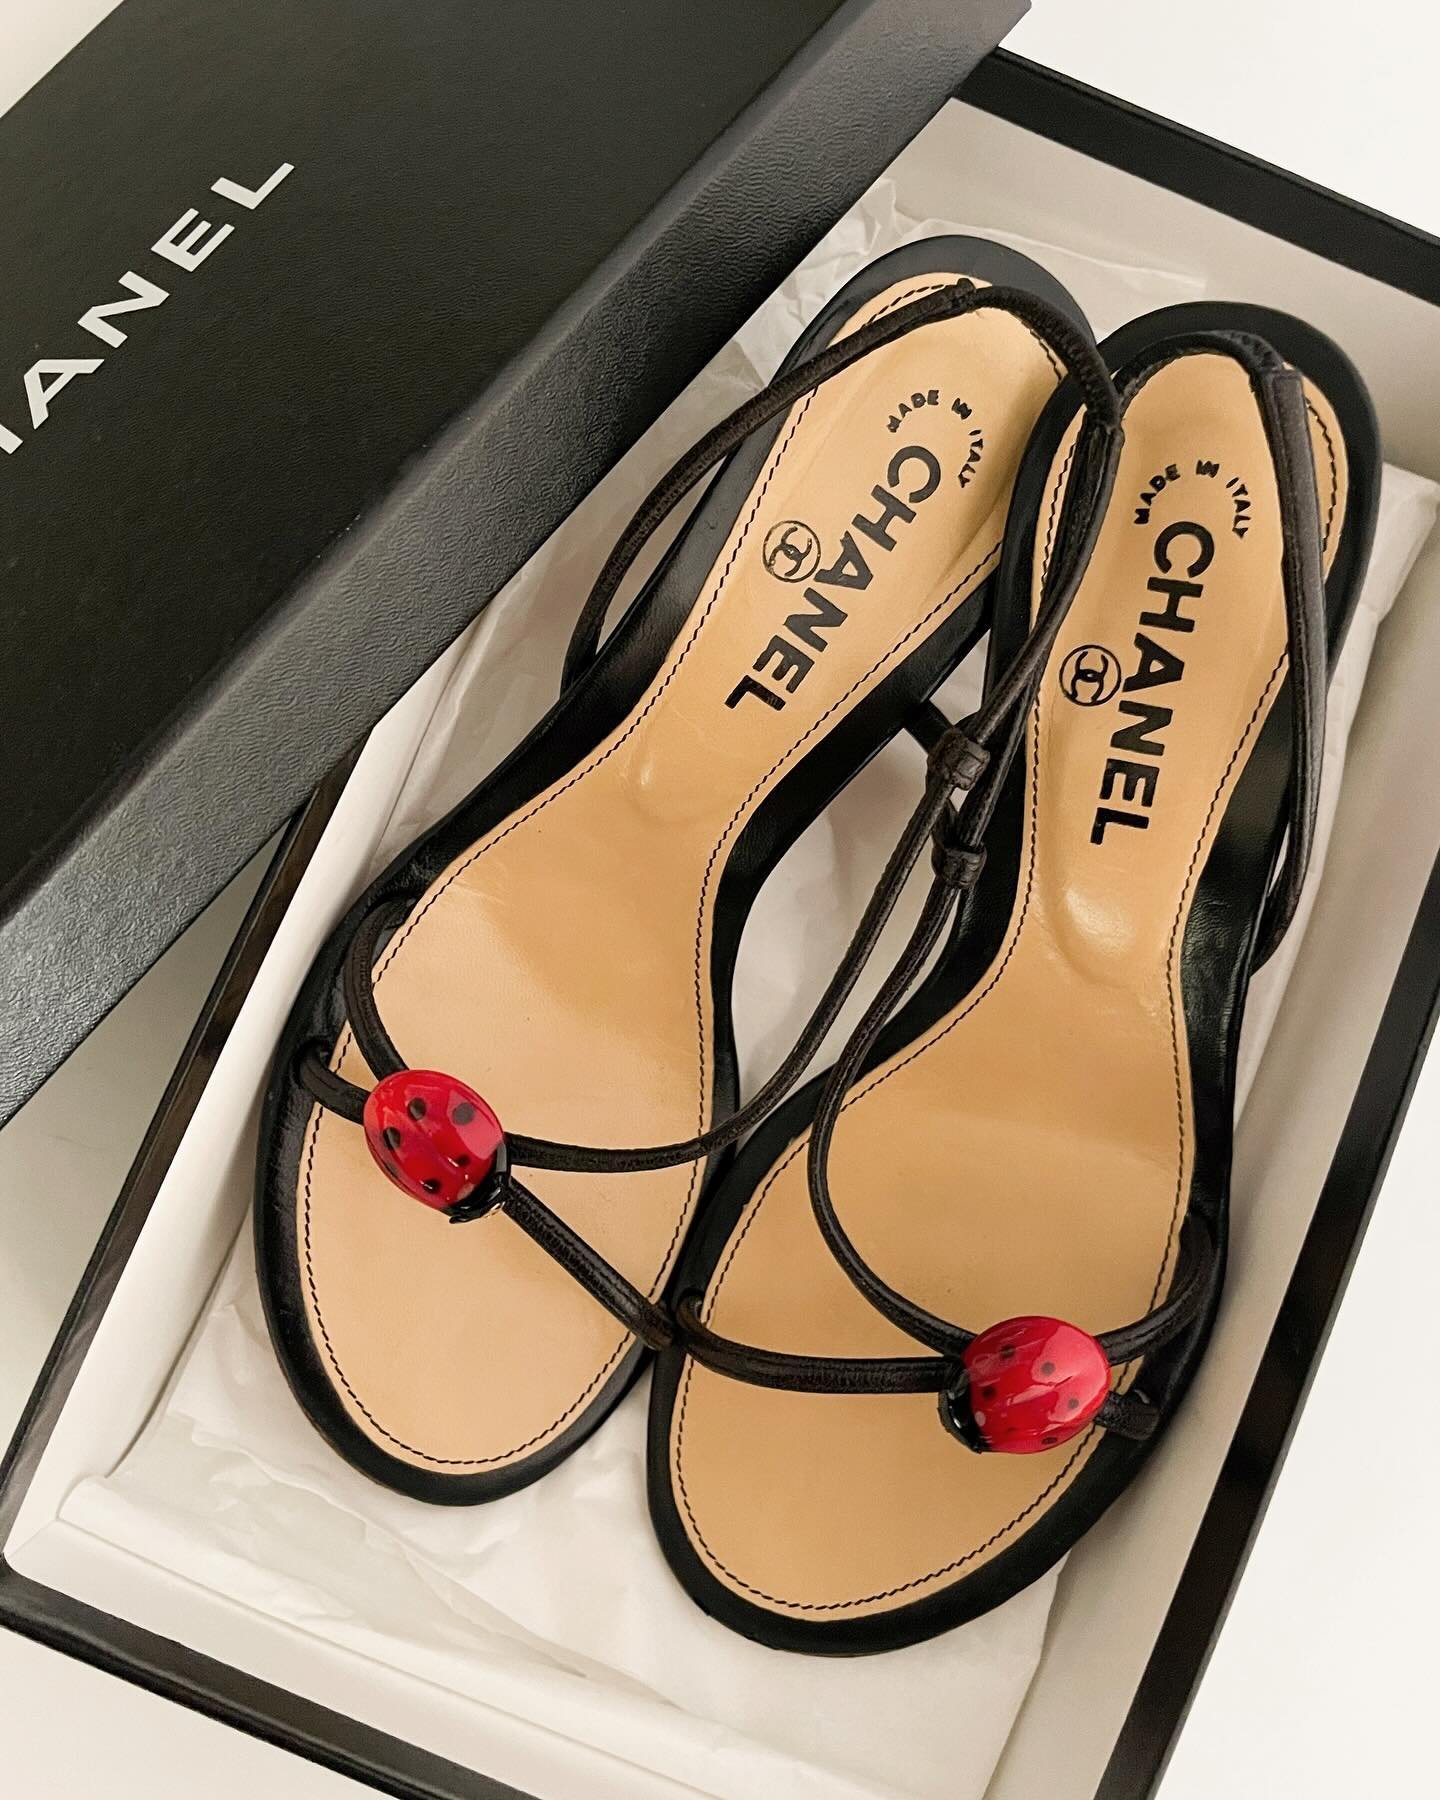 vintage Chanel ladybug sandal heels &amp; other summer treasures 🐞 which pair of heels is your favorite, 1-10? one of our largest shoe collections of the year arrives online in the sororit&eacute; European summer collection Monday, May 27th at 2:00 